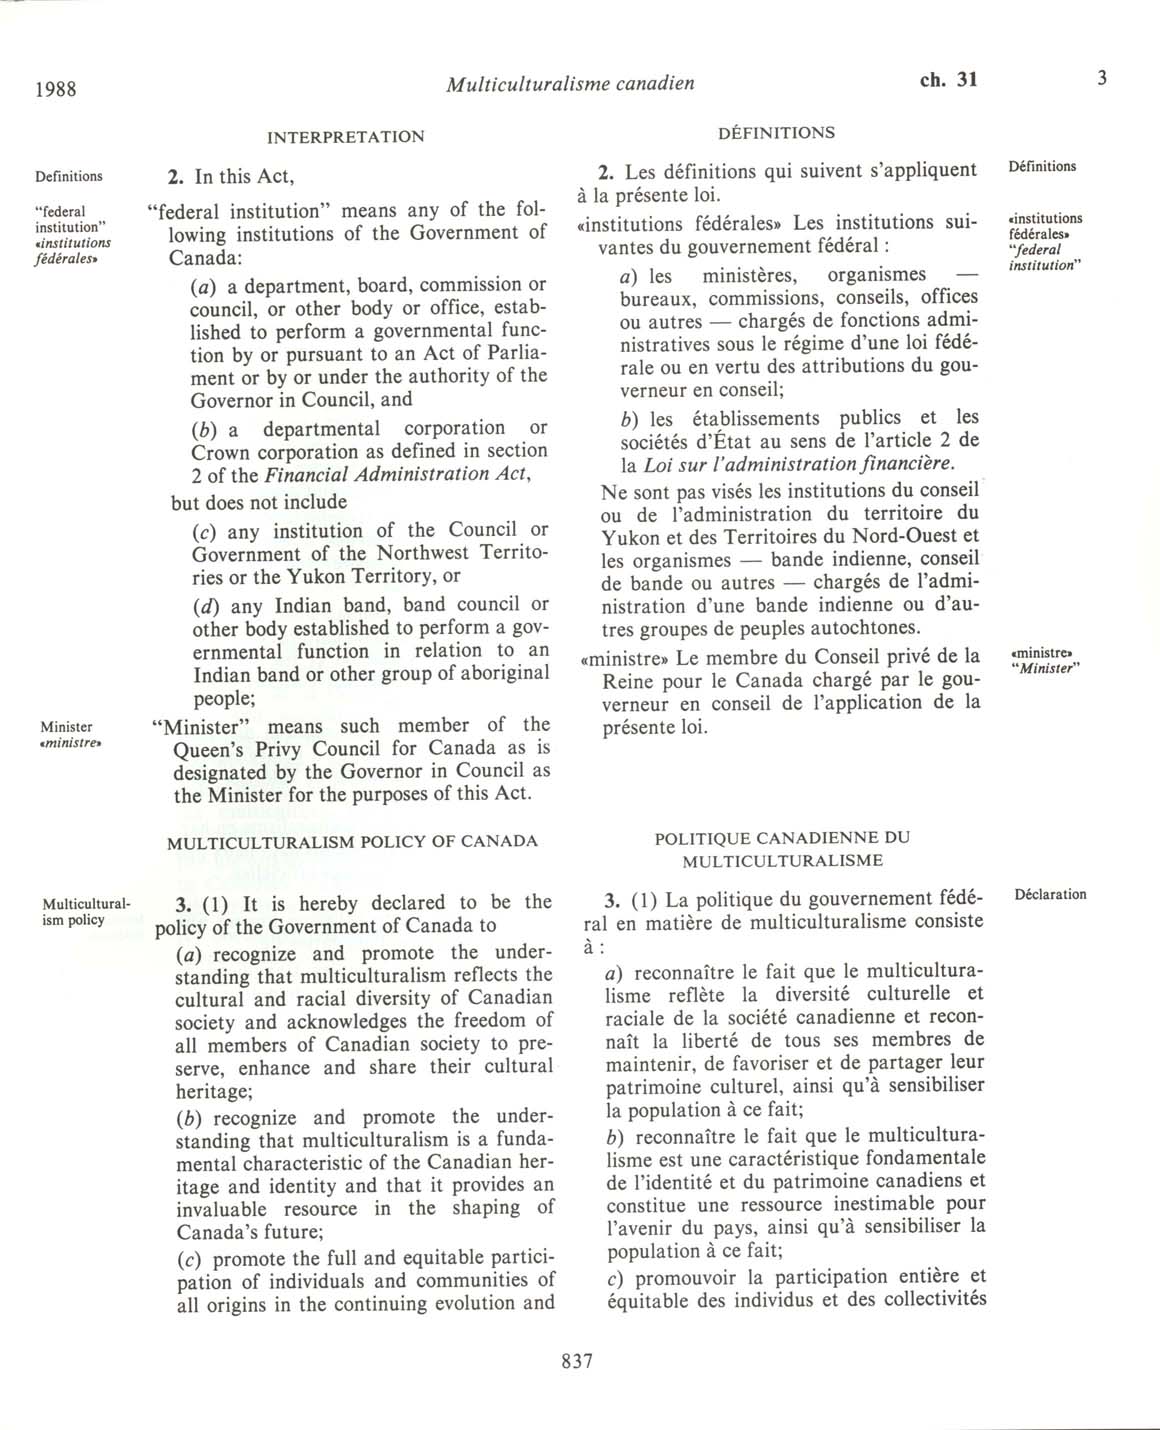 Page 837 Canadian Multiculturalism Act, 1988